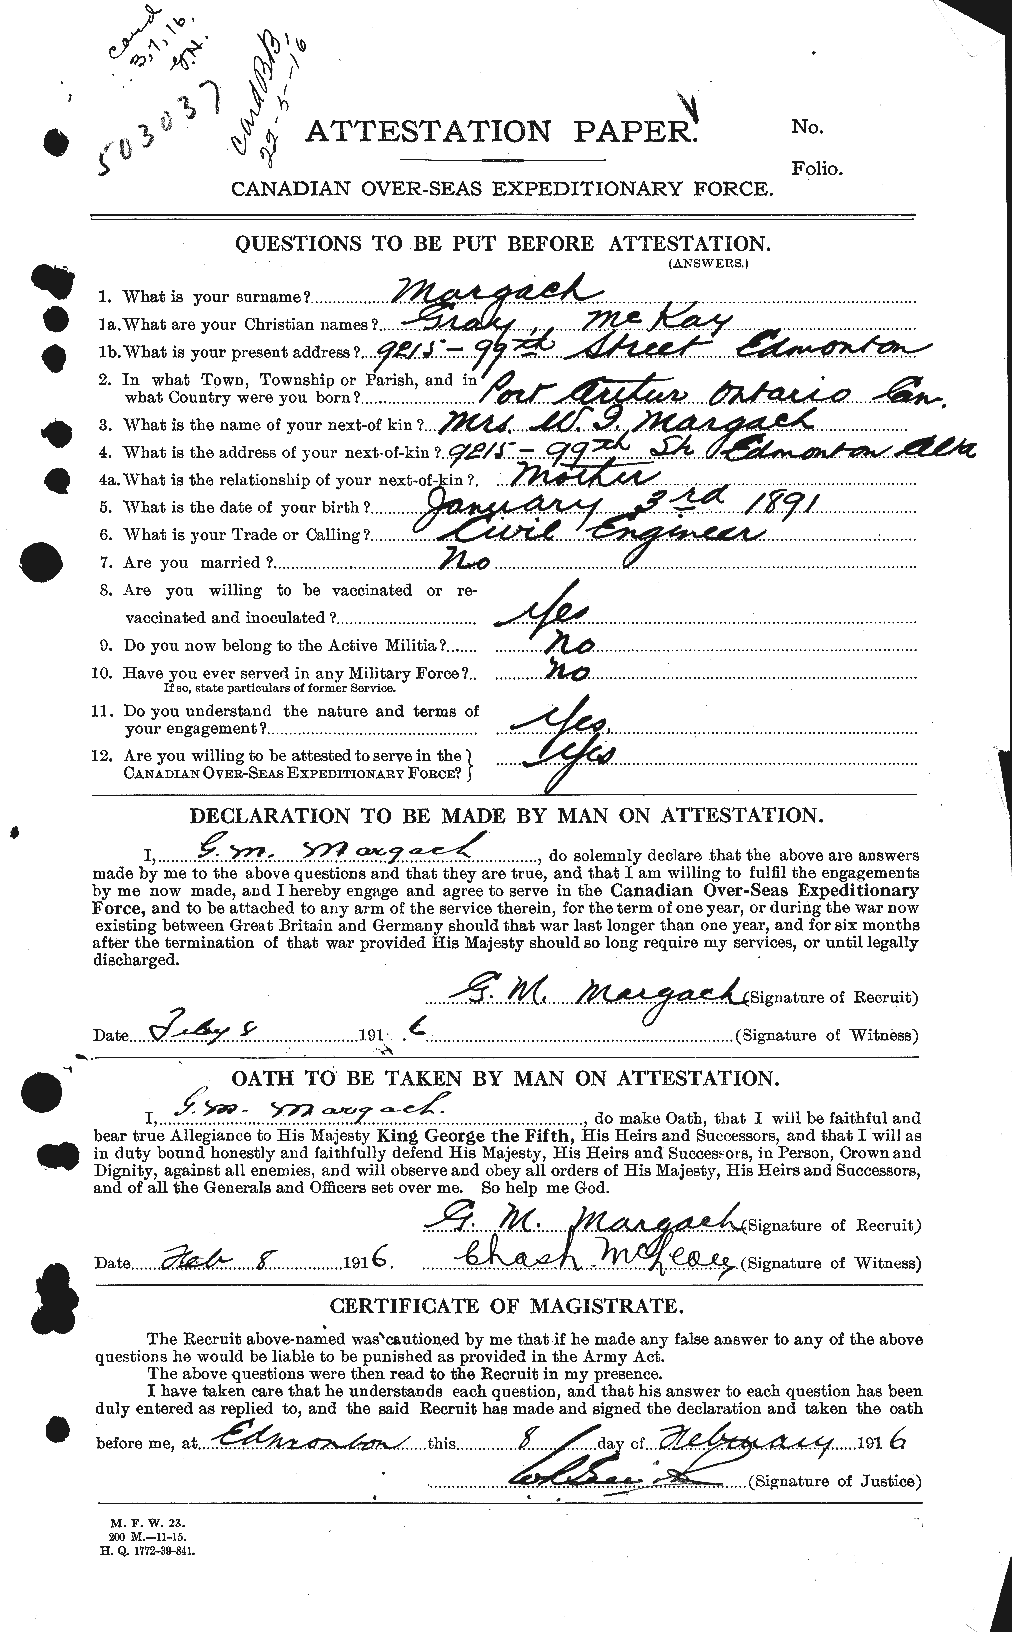 Personnel Records of the First World War - CEF 481248a